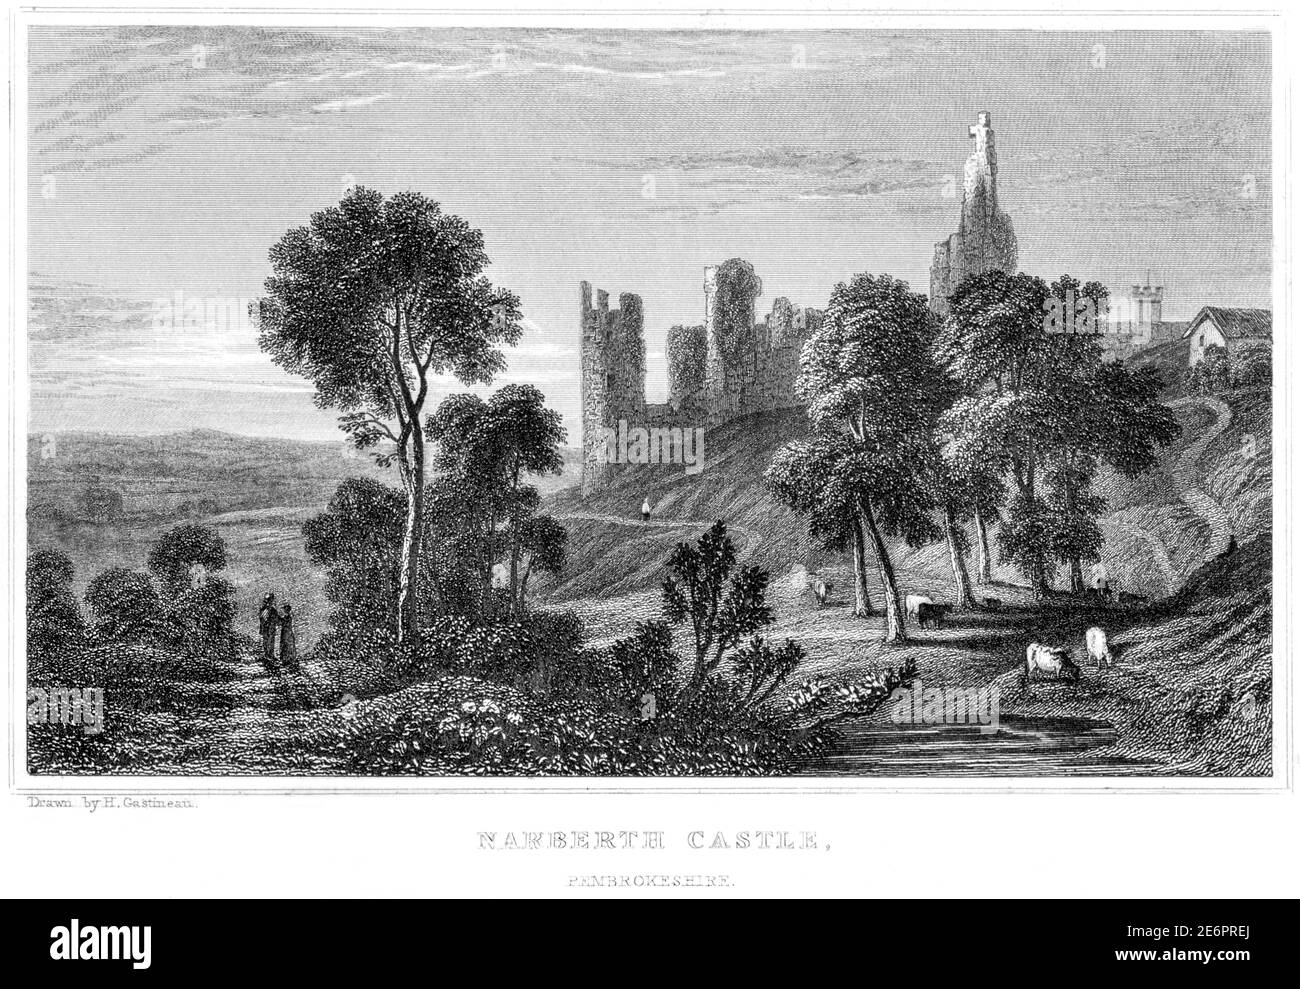 An engraving of Narberth Castle, Pembrokeshire scanned at high resolution from a book published in 1854.  Believed copyright free. Stock Photo